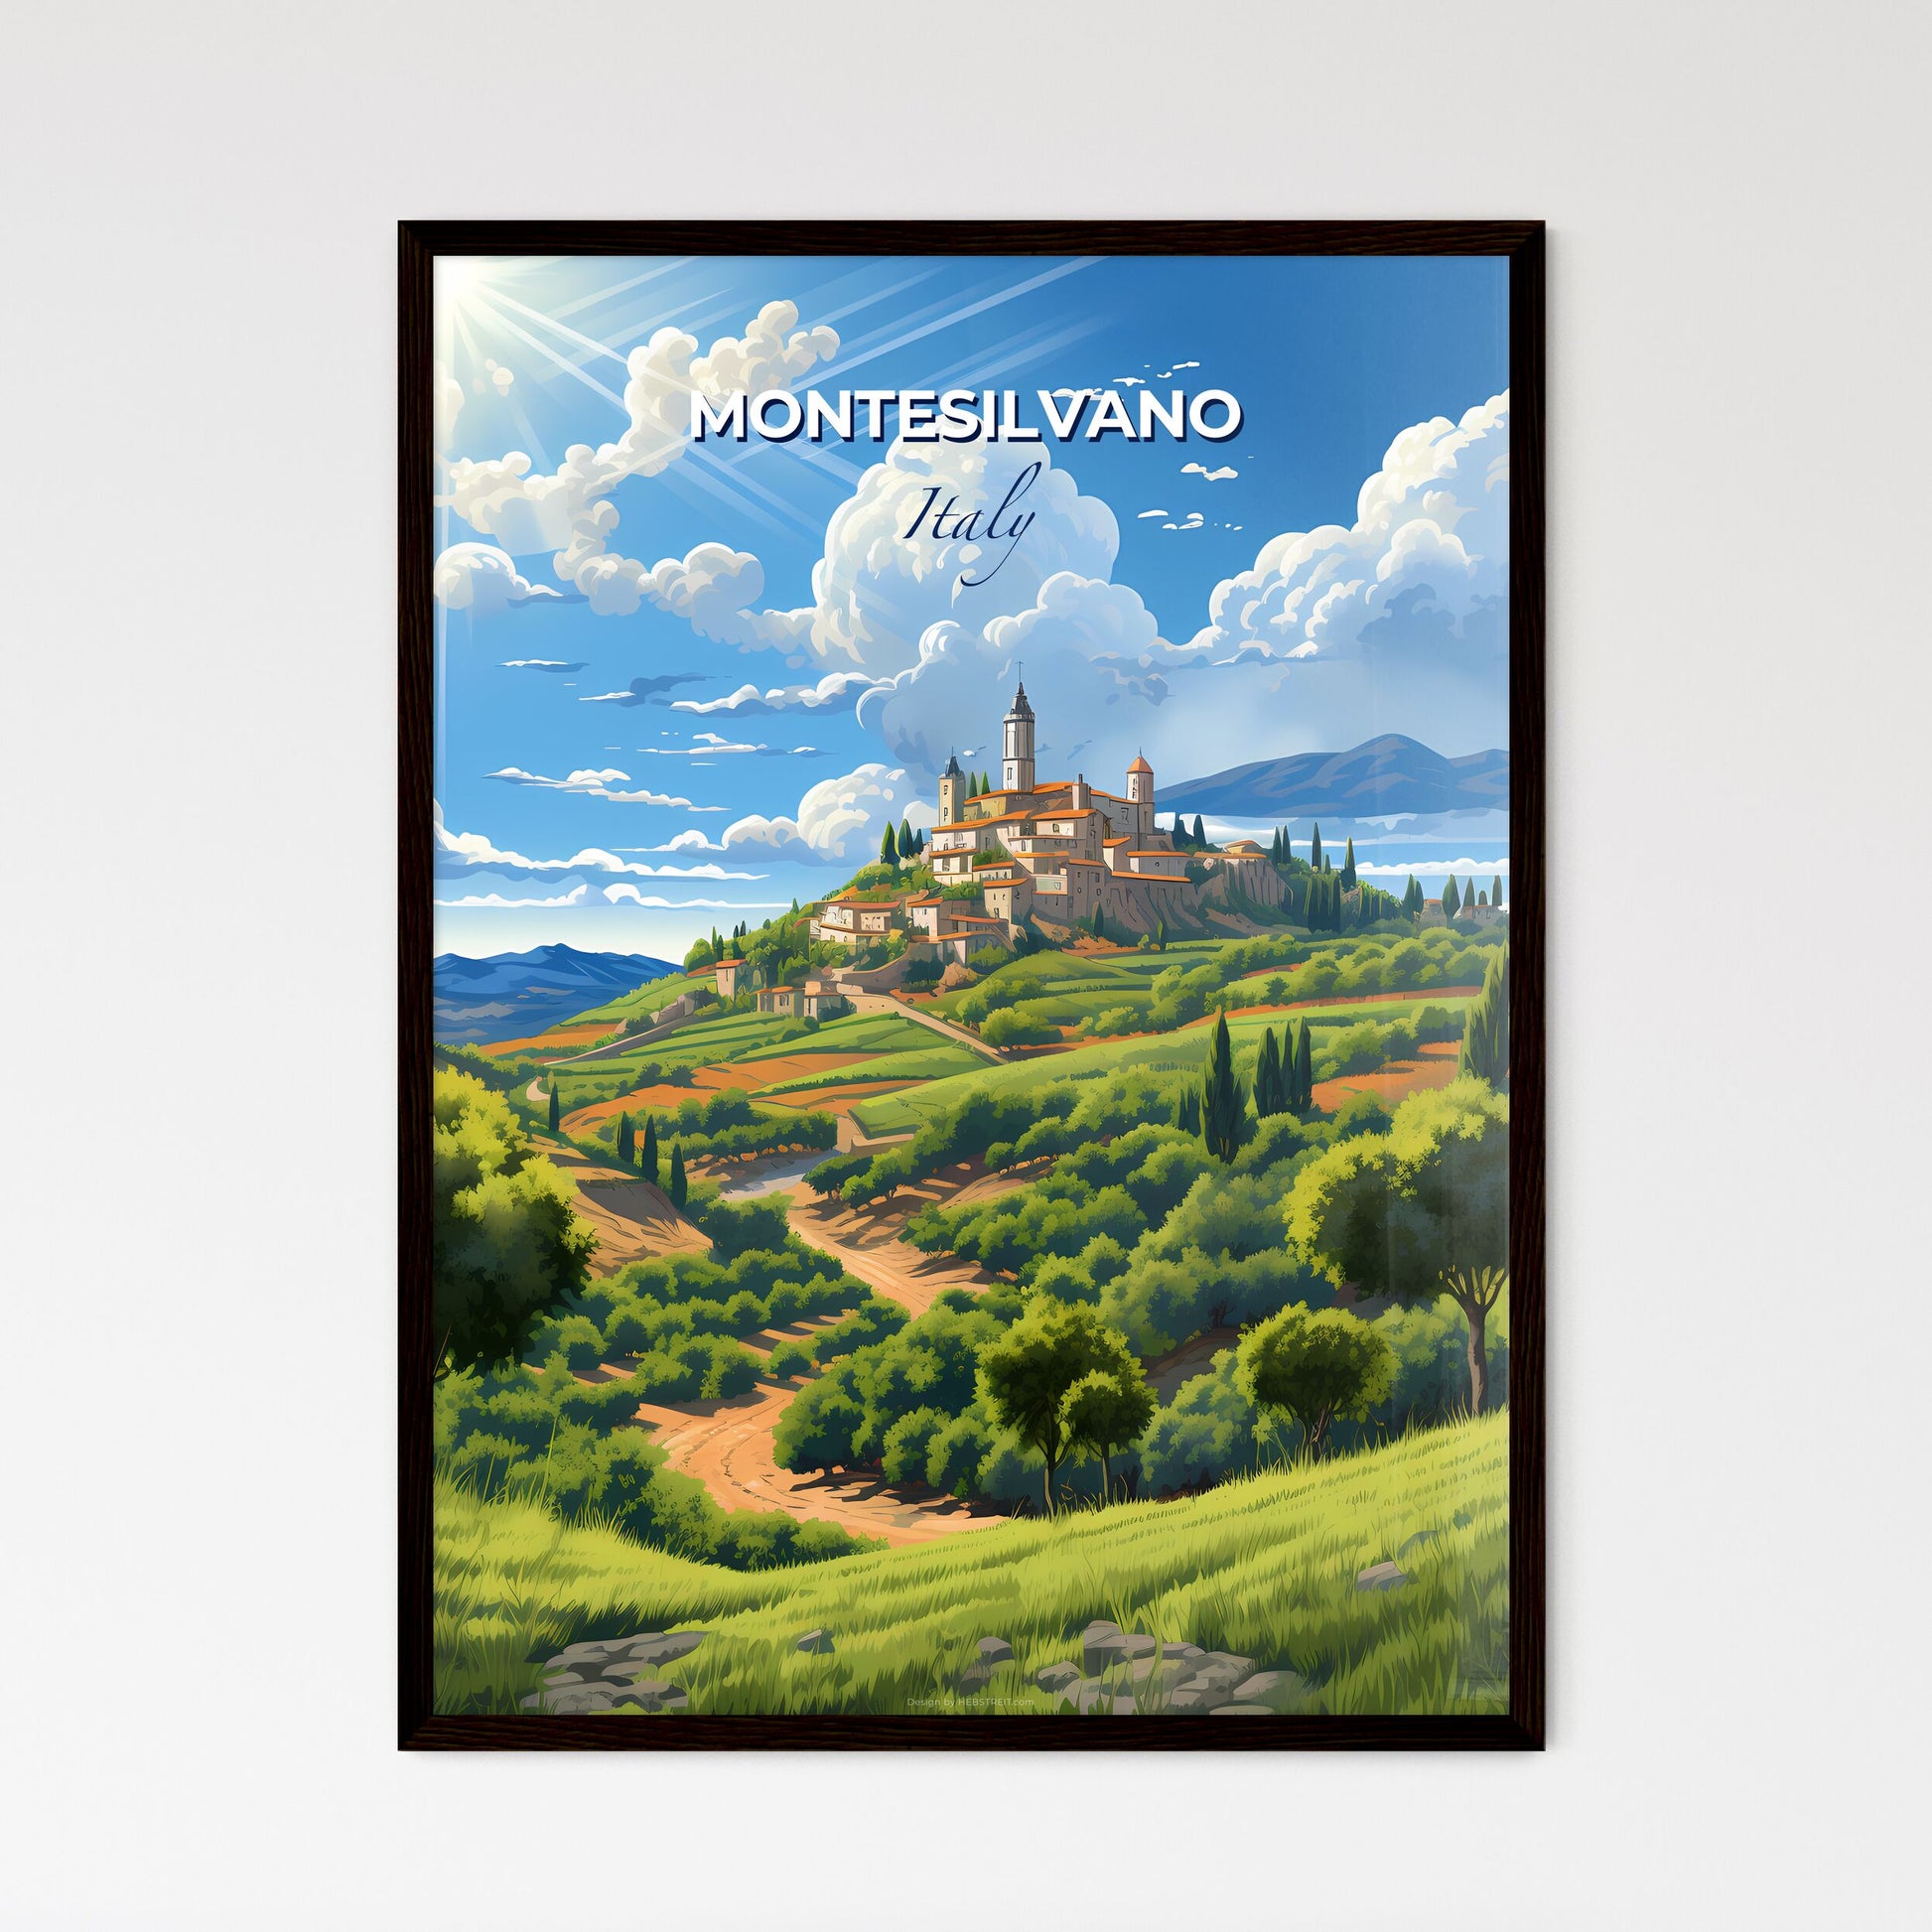 Montesilvano, Italy, A Poster of a landscape with a castle on a hill Default Title